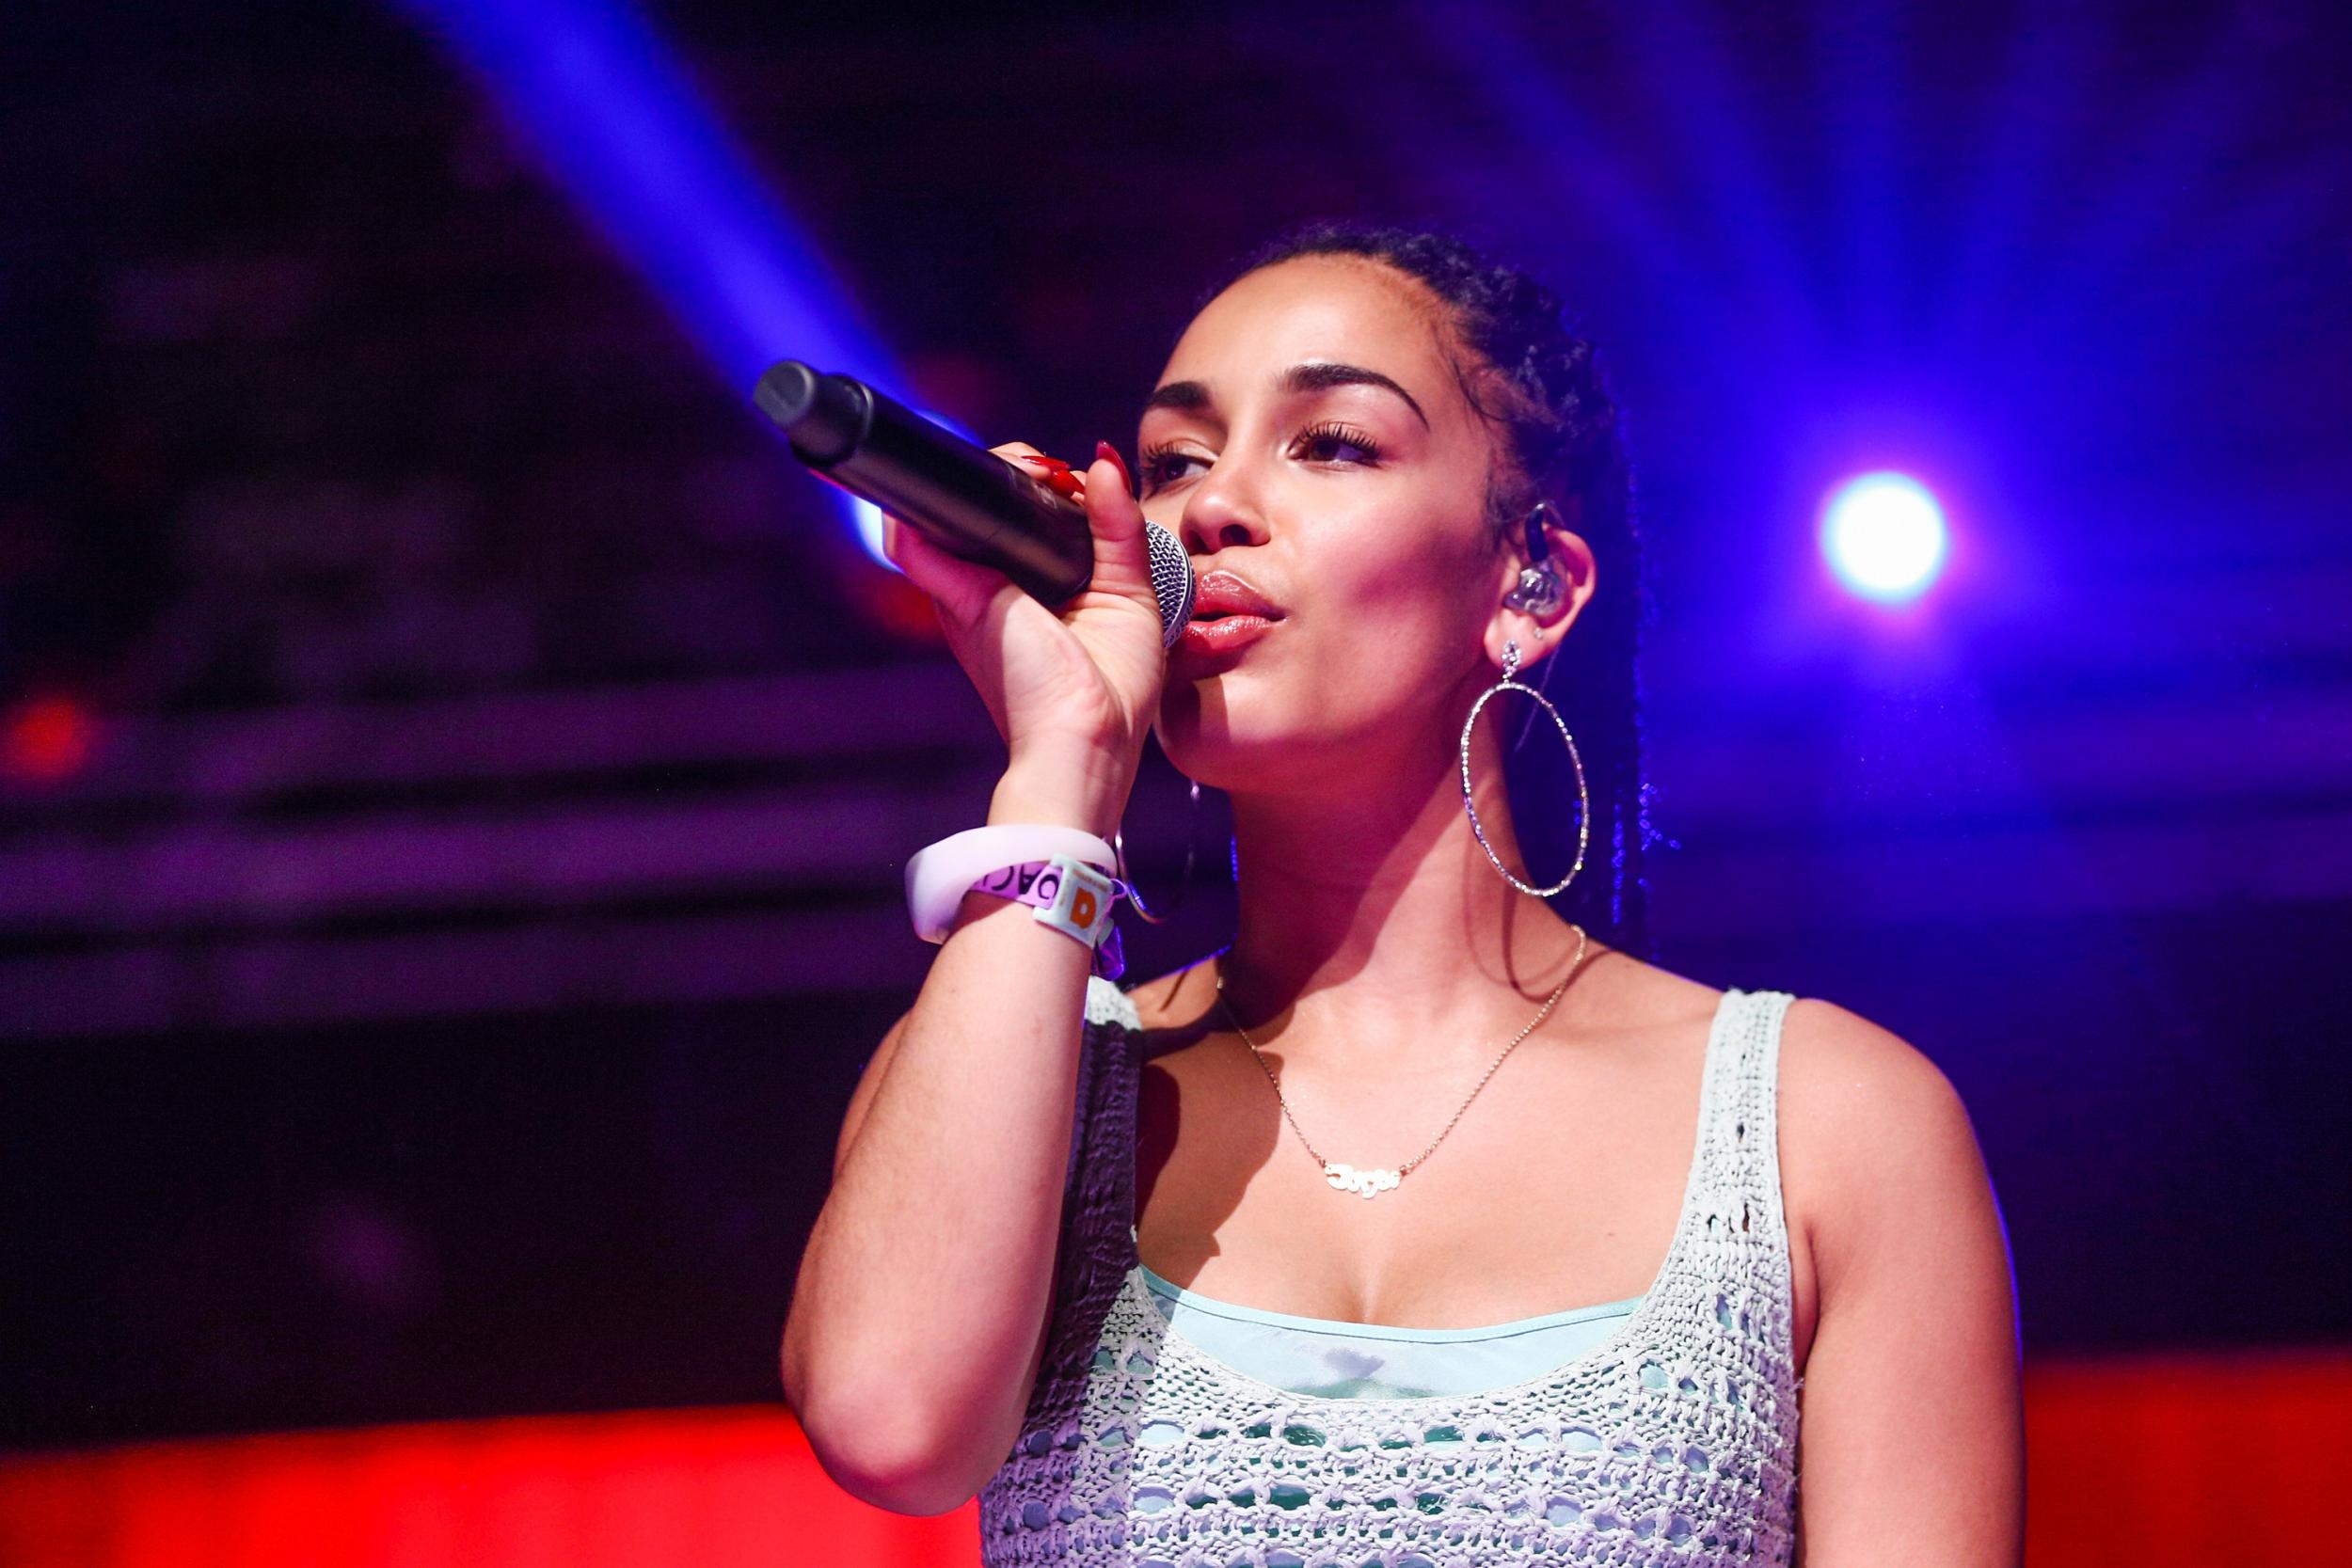 Jorja Smith, 21, cites the late Amy Winehouse as an influence